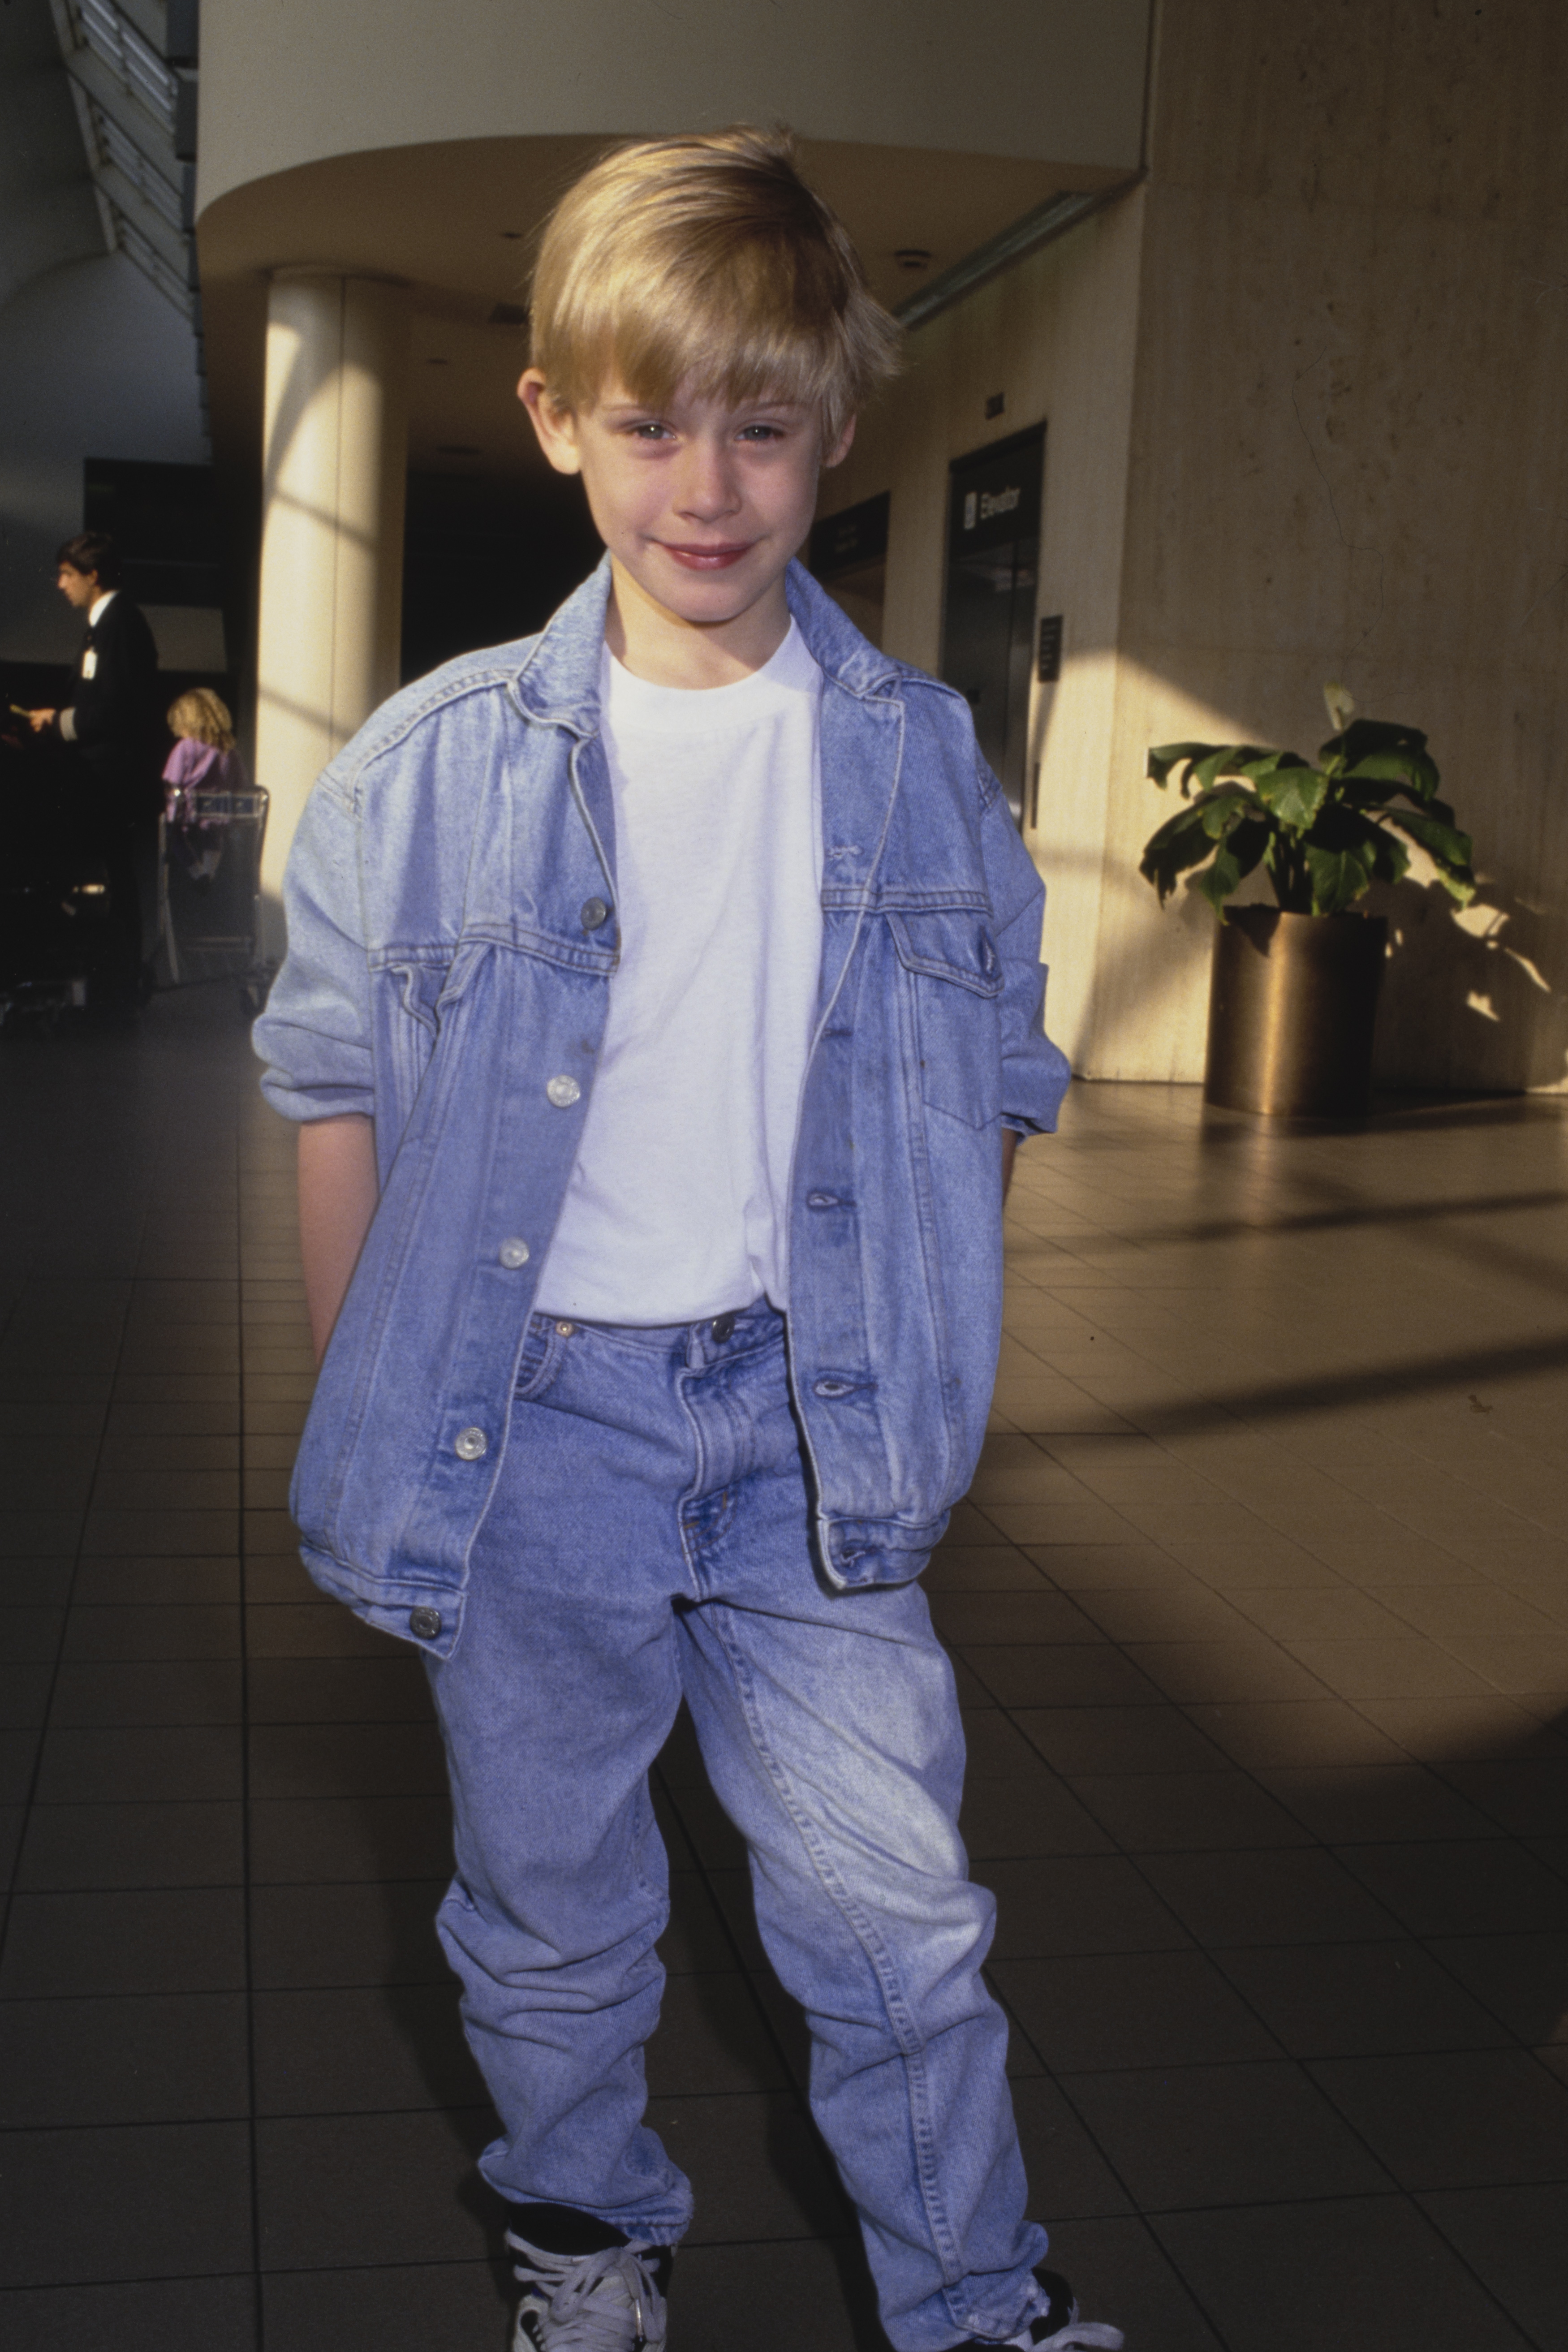 Ex child star at the rehearsals for the 48th Golden Globe Awards in Beverly Hills, California on January 18, 1991 | Source: Getty Images